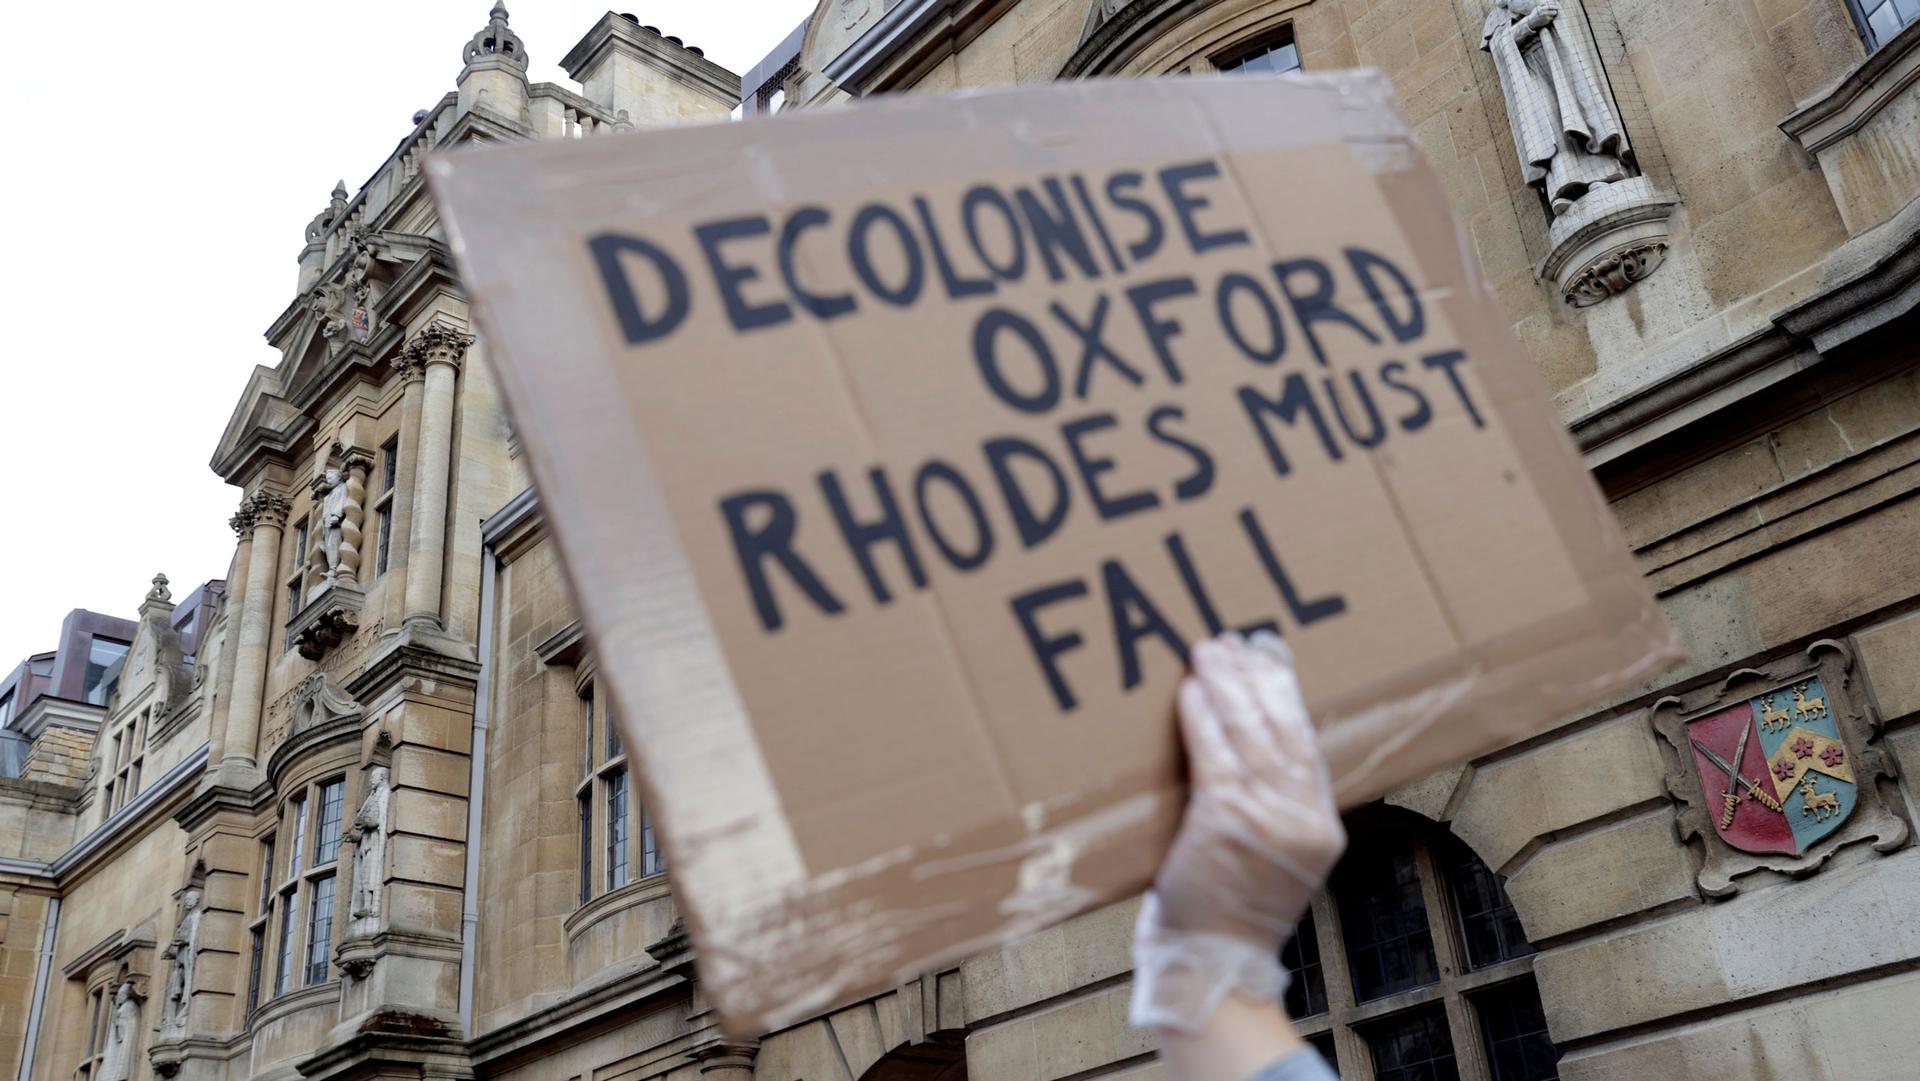 A demonstrator's hand is seen holding a placard reading "Decolonise Oxford/Rhodes must fall"